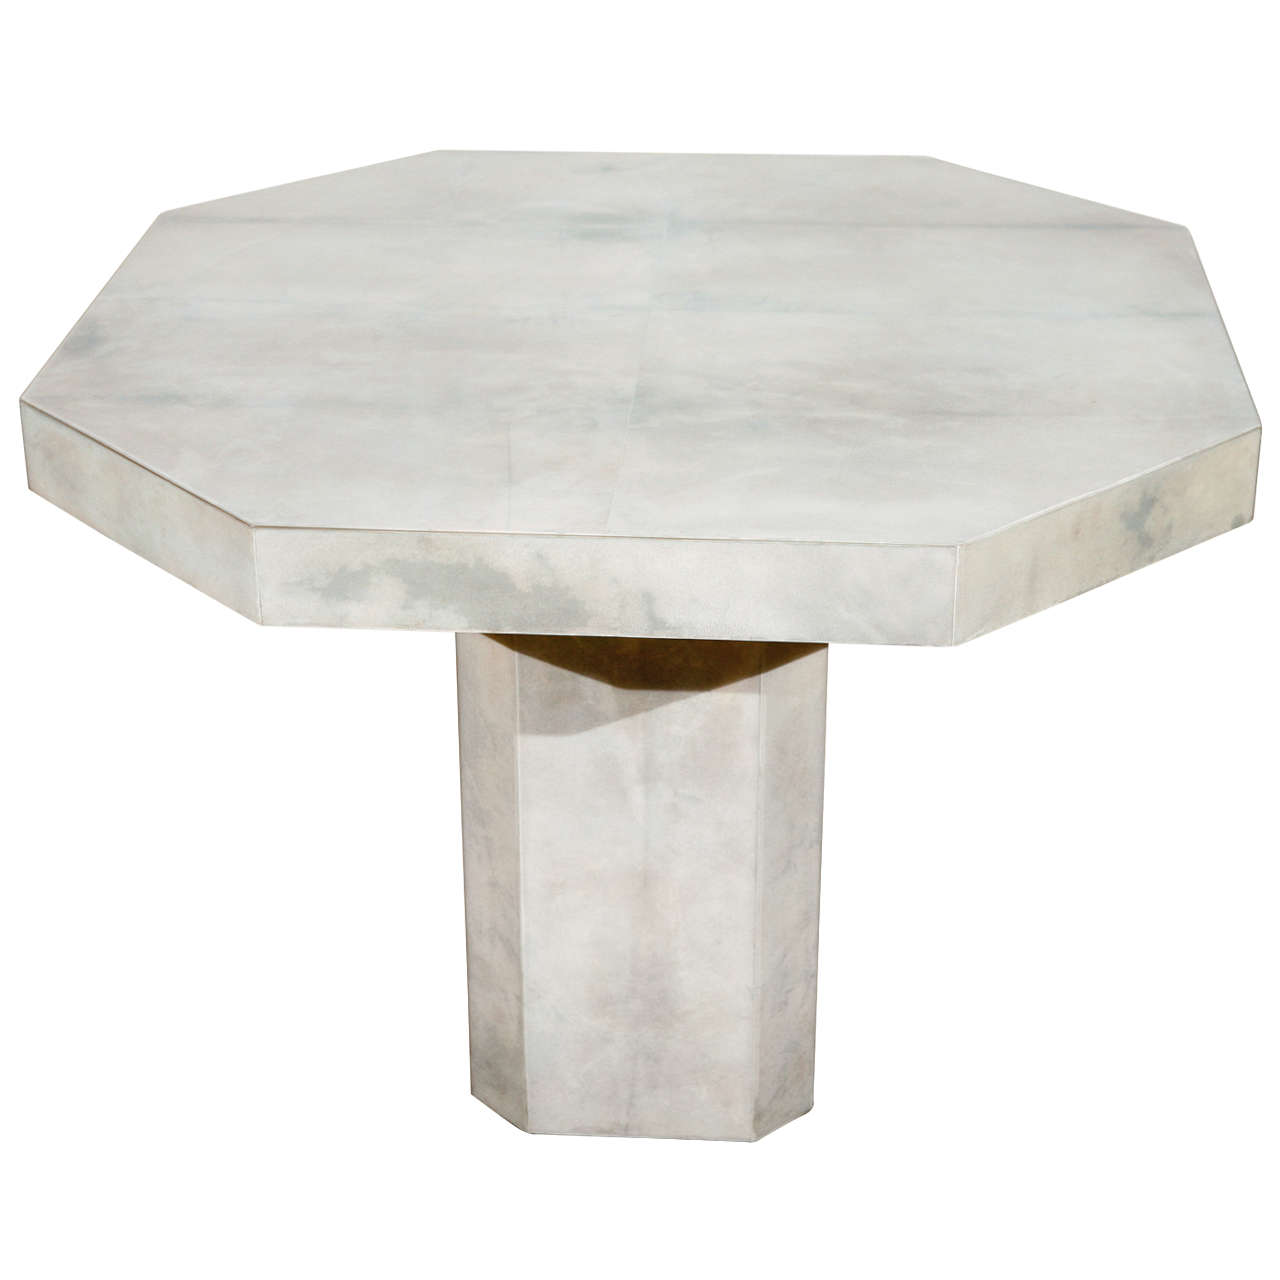 Hexagonal Center or Small Dining Table